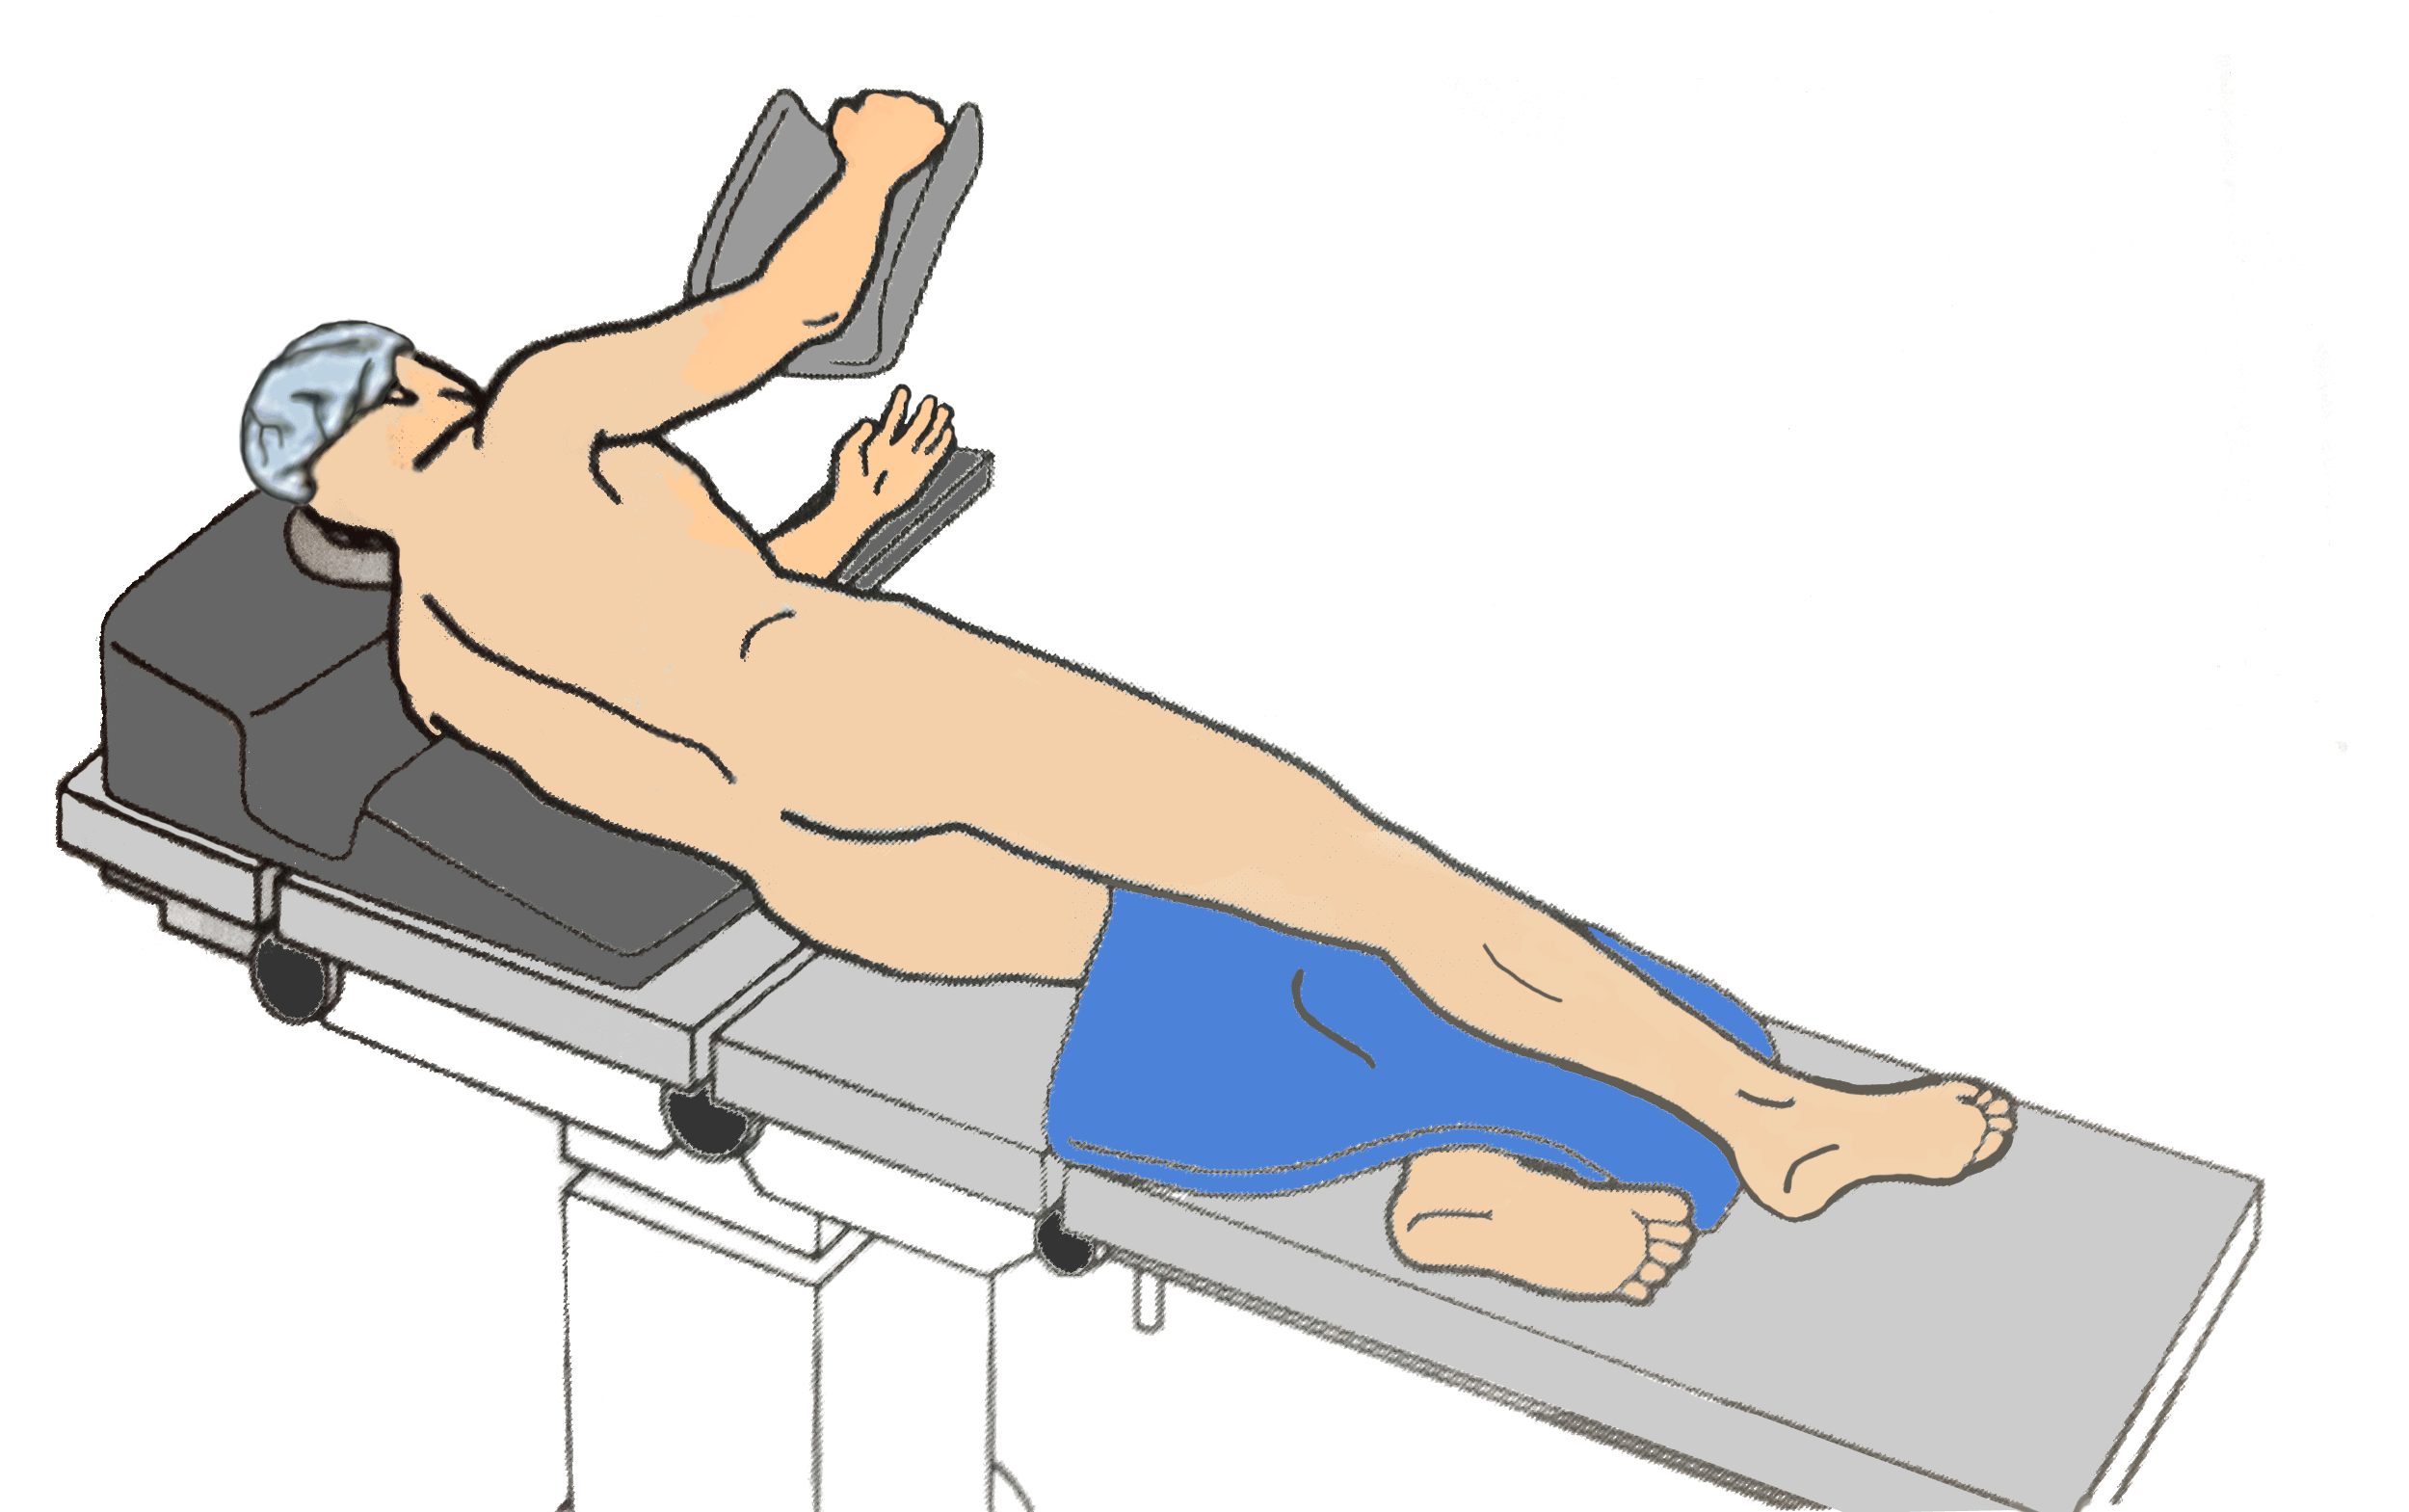 File:Supine position.gif - Wikimedia Commons